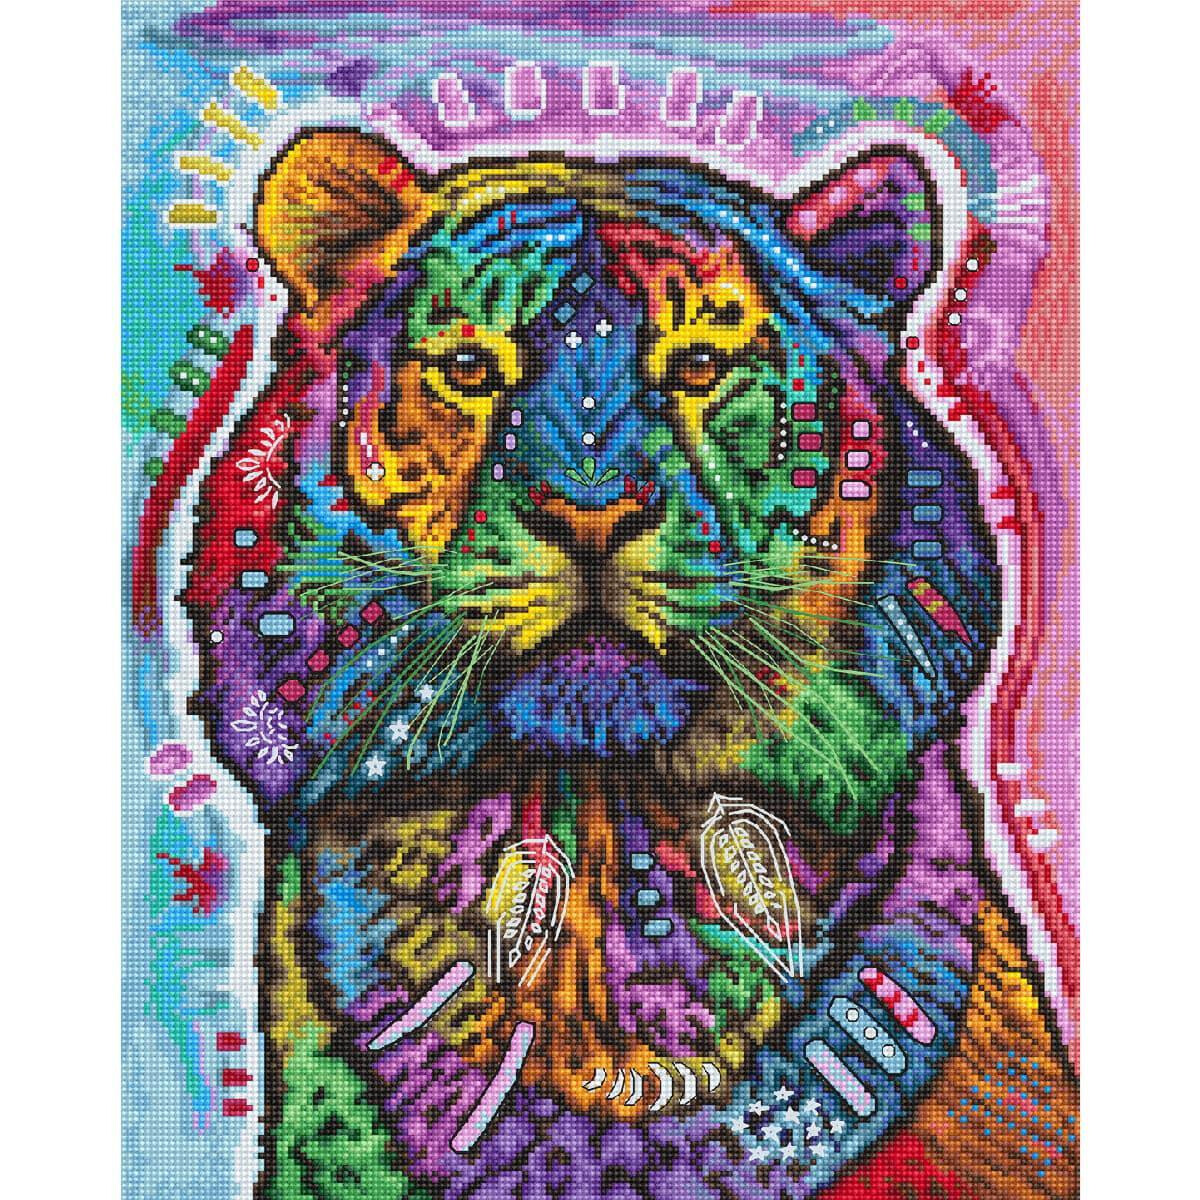 A vibrant psychedelic style artwork depicting a tiger...